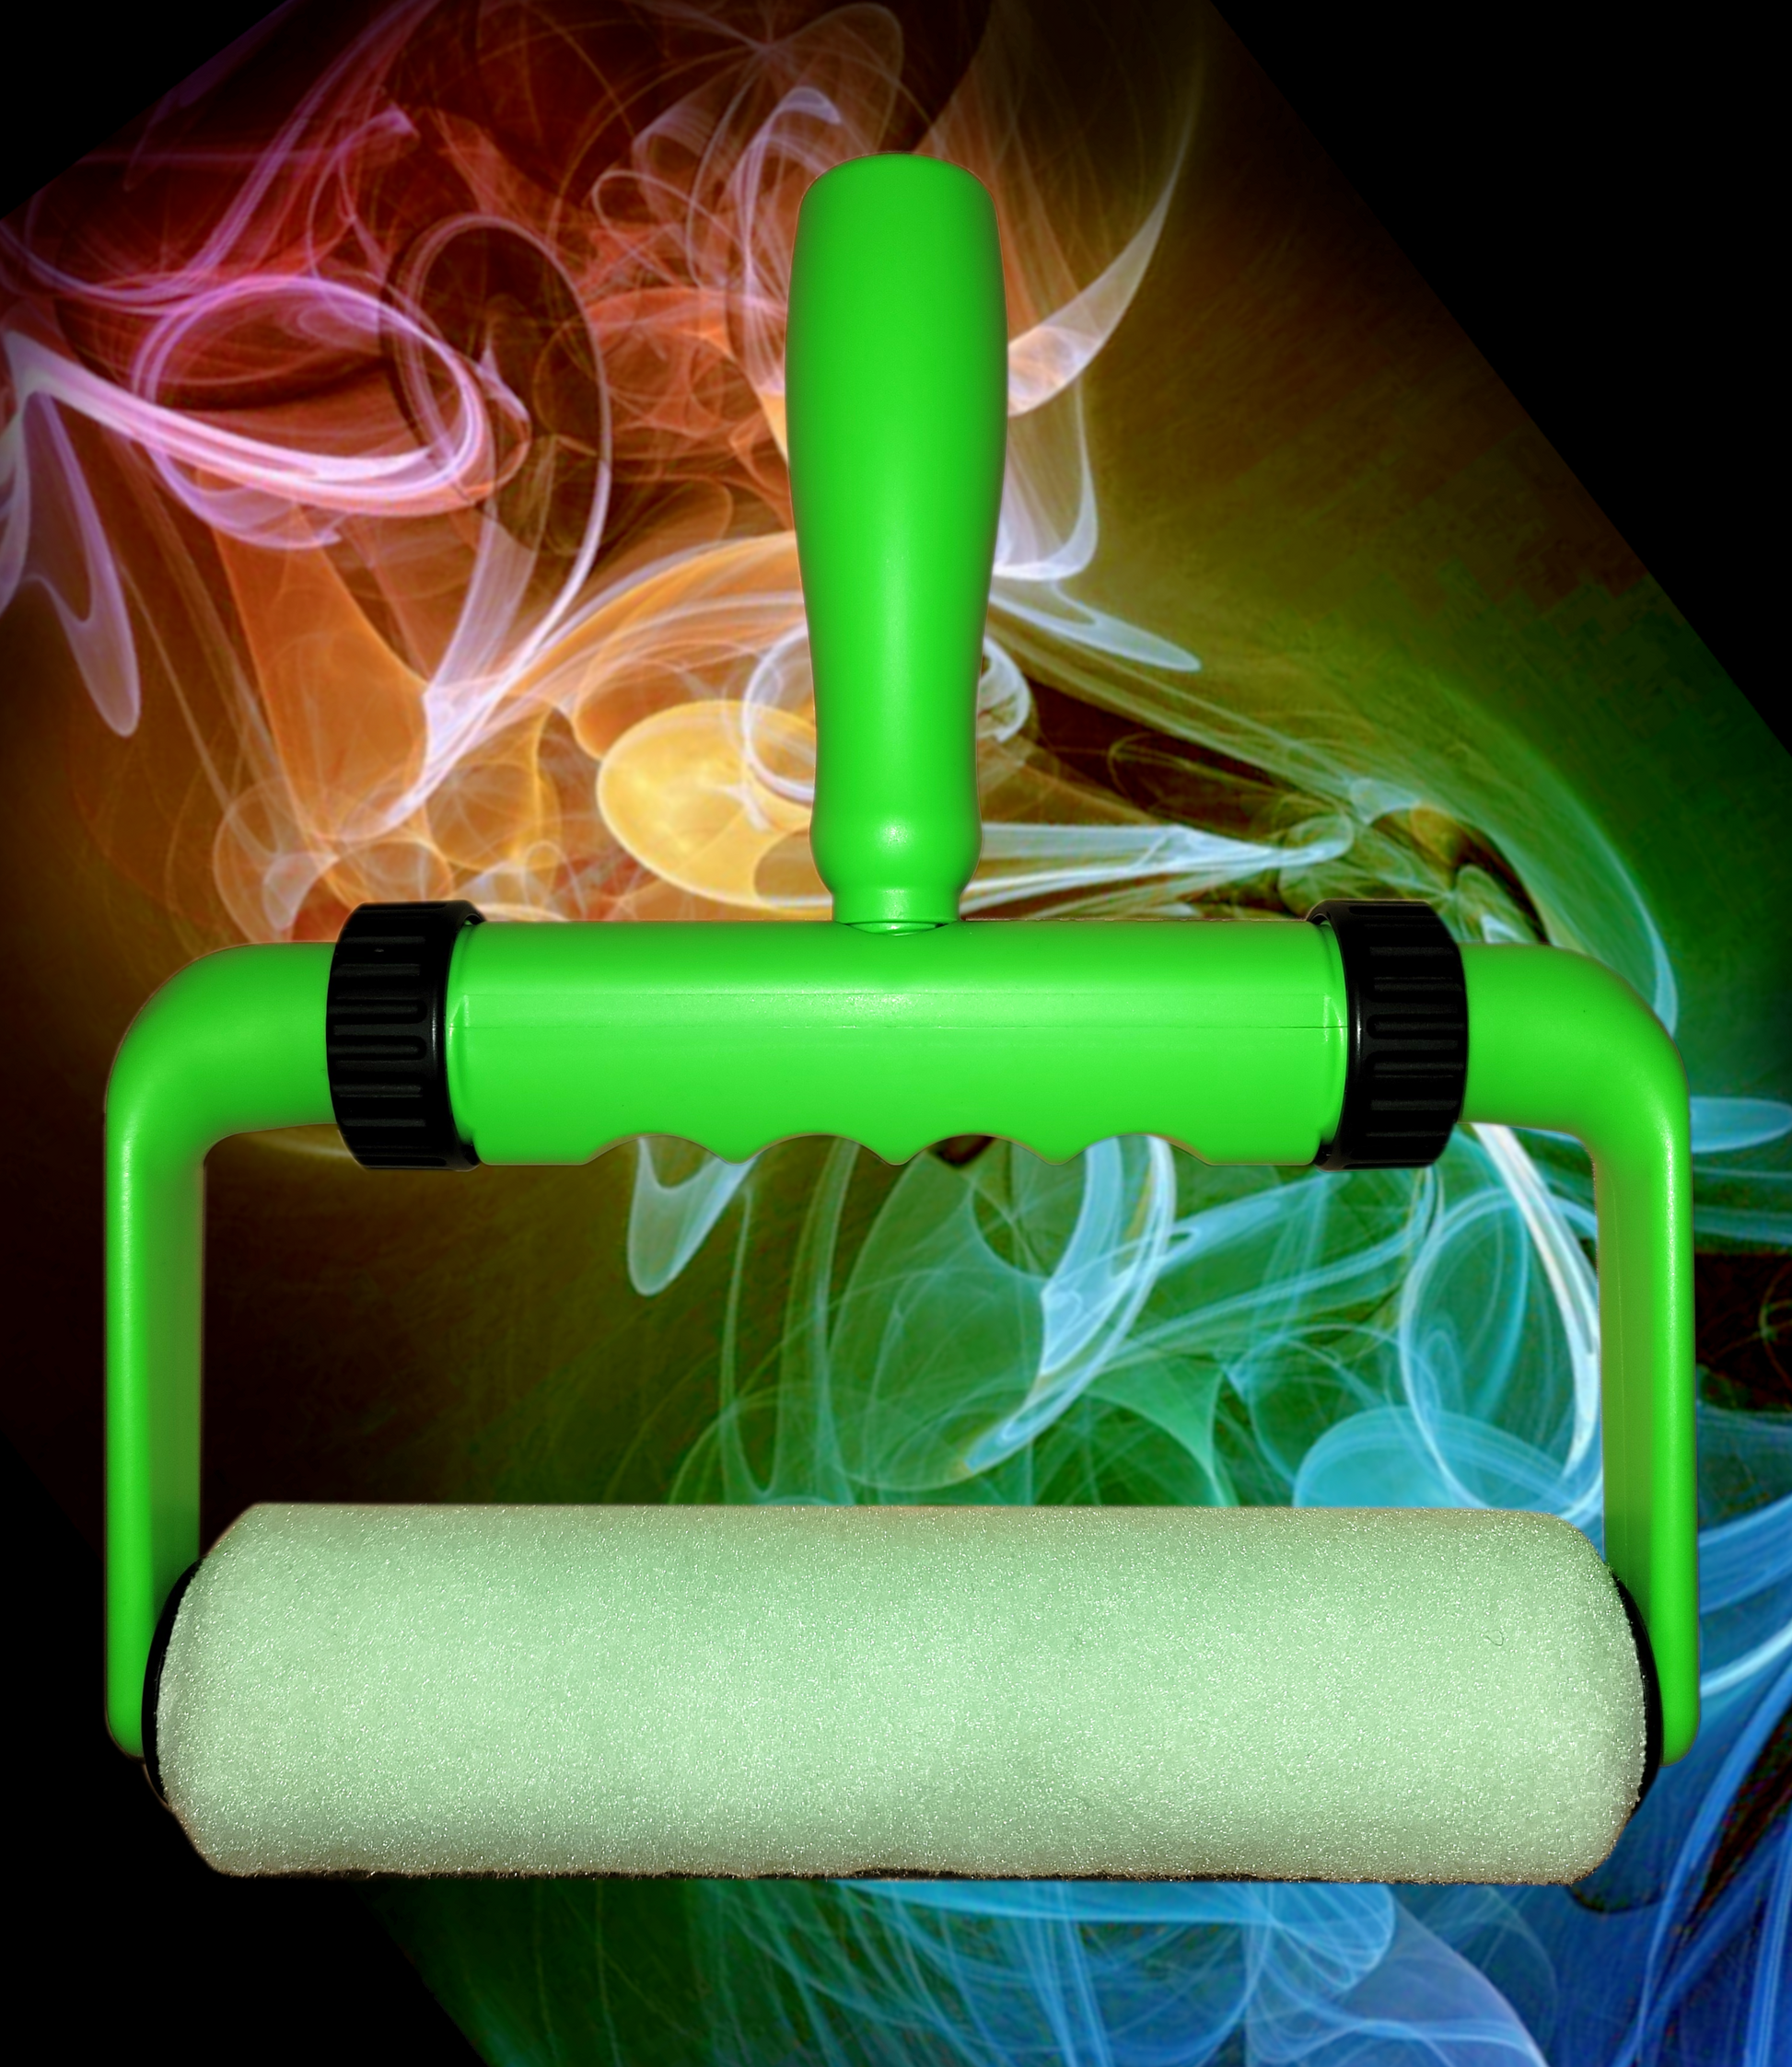 Artistic view of the BetterGrip Paint Roller, with colorful smoke in background.